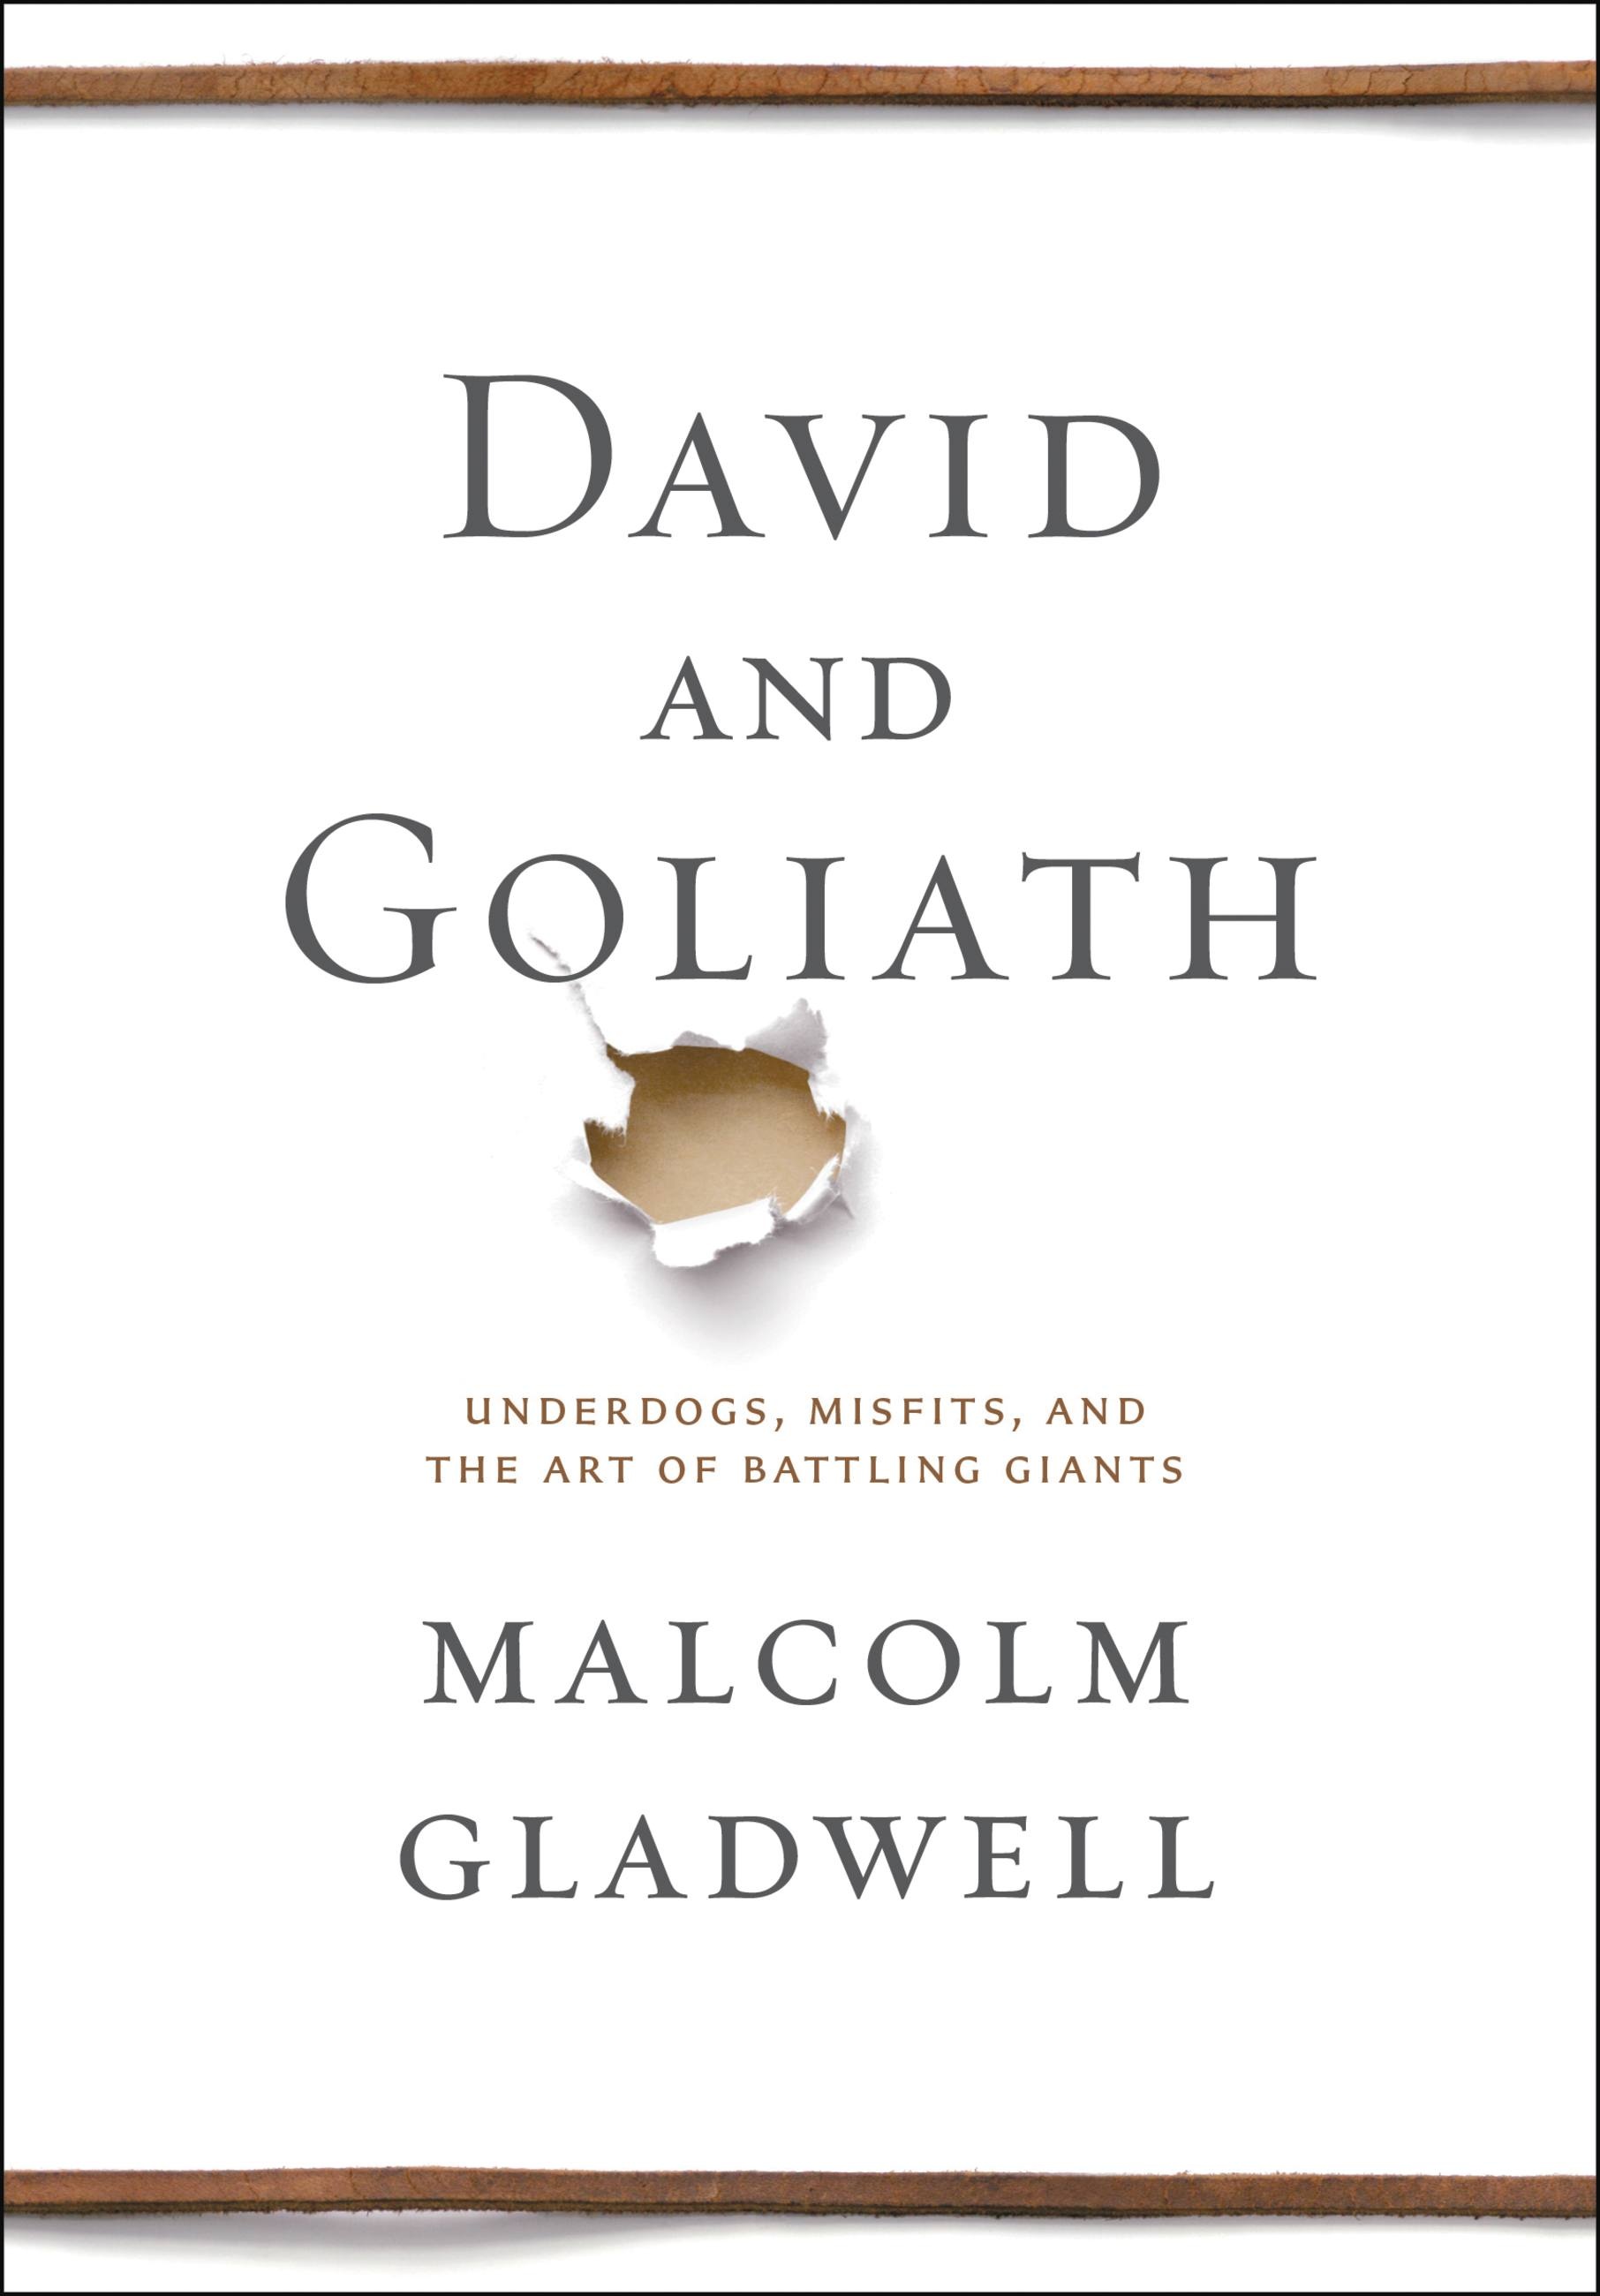 Image result for david and goliath malcolm gladwell